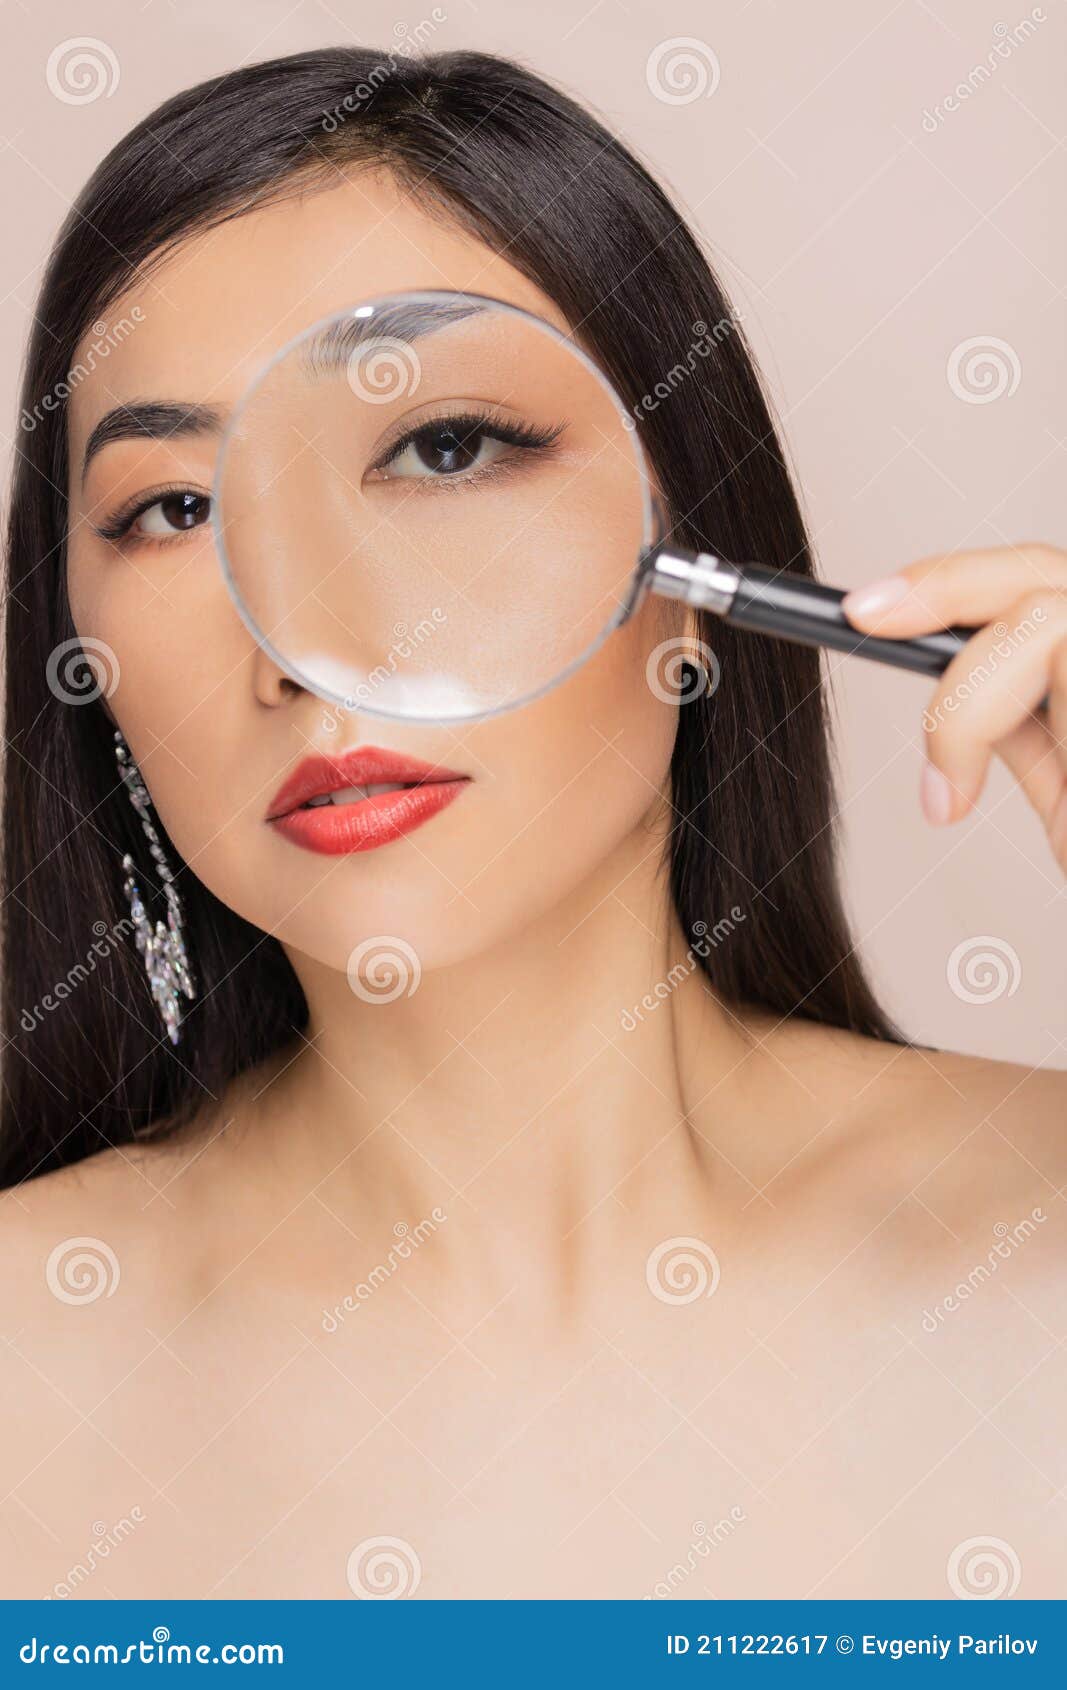  Magnifying Glasses for Eyelash Extensions : Beauty & Personal  Care